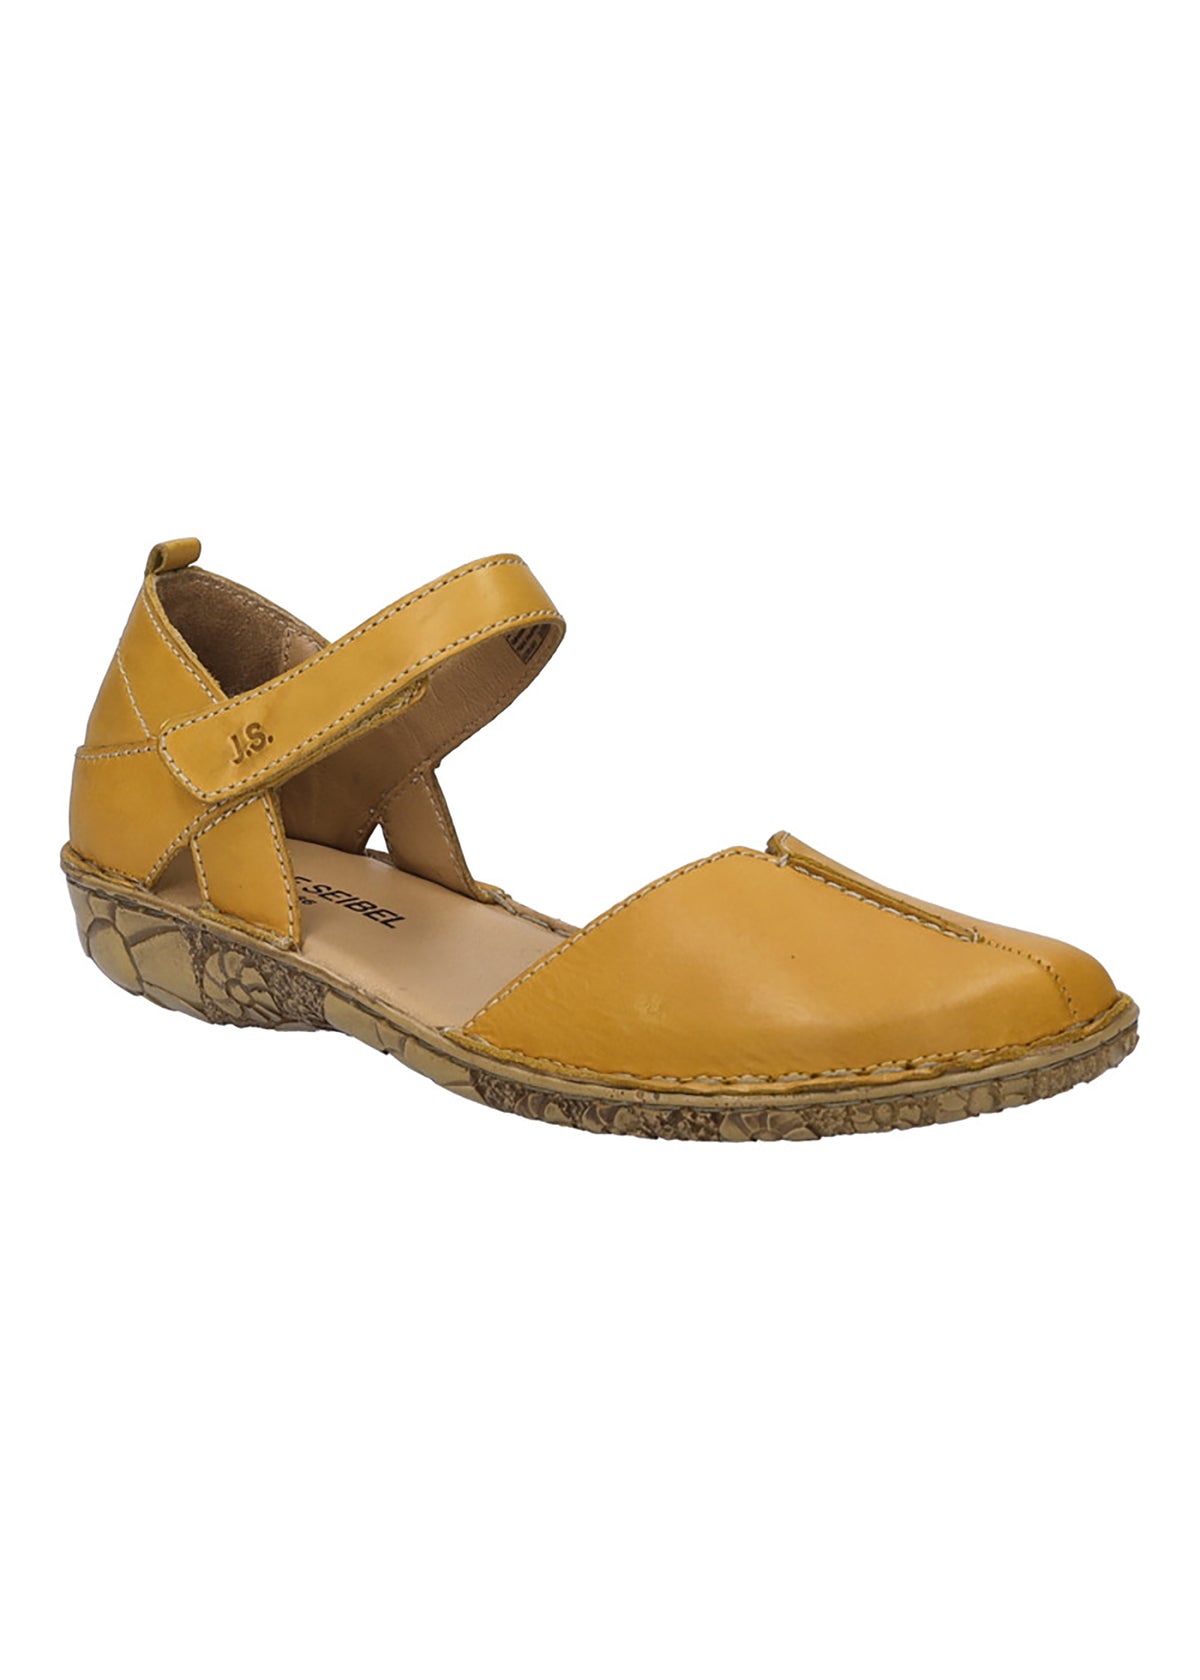 Closed toe sandals - yellow leather, Rosalie 42